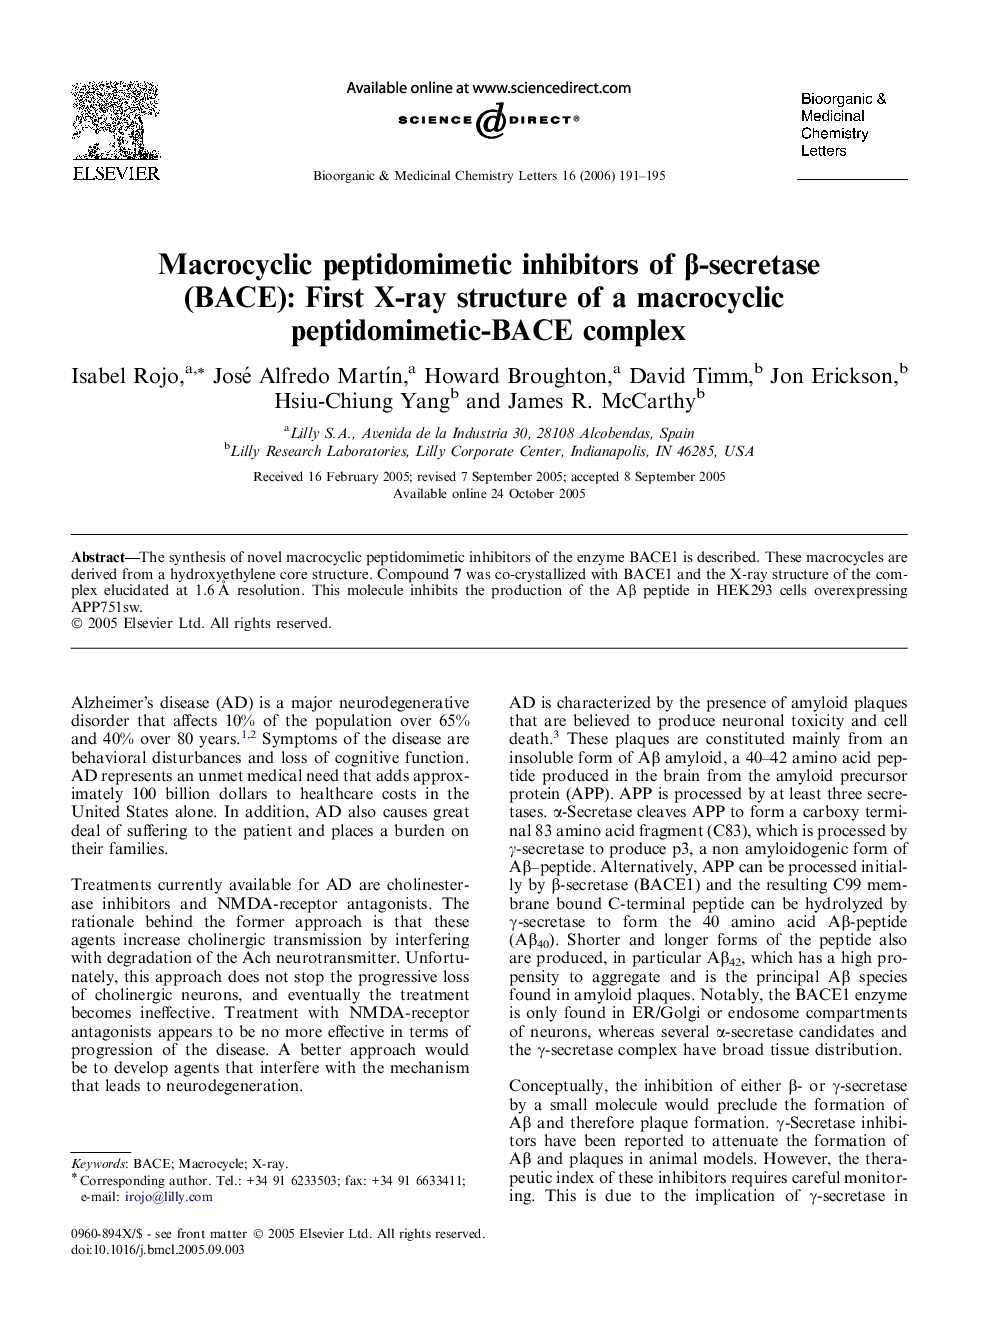 Macrocyclic peptidomimetic inhibitors of β-secretase (BACE): First X-ray structure of a macrocyclic peptidomimetic-BACE complex